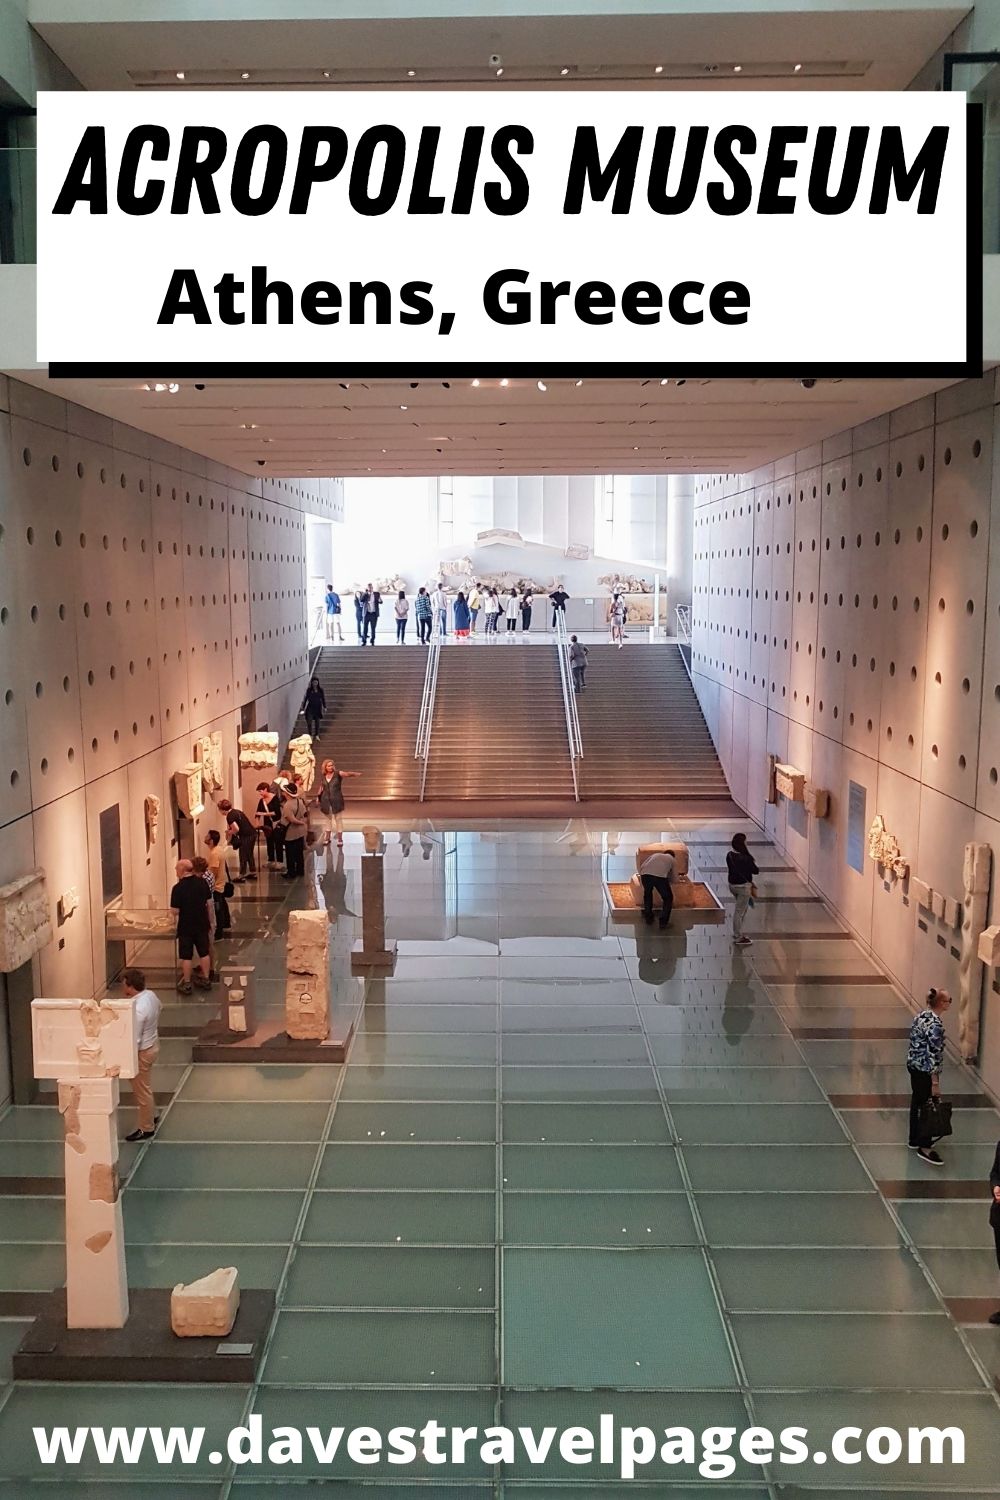 Acropolis Museum Athens Greece - Everything you need to know